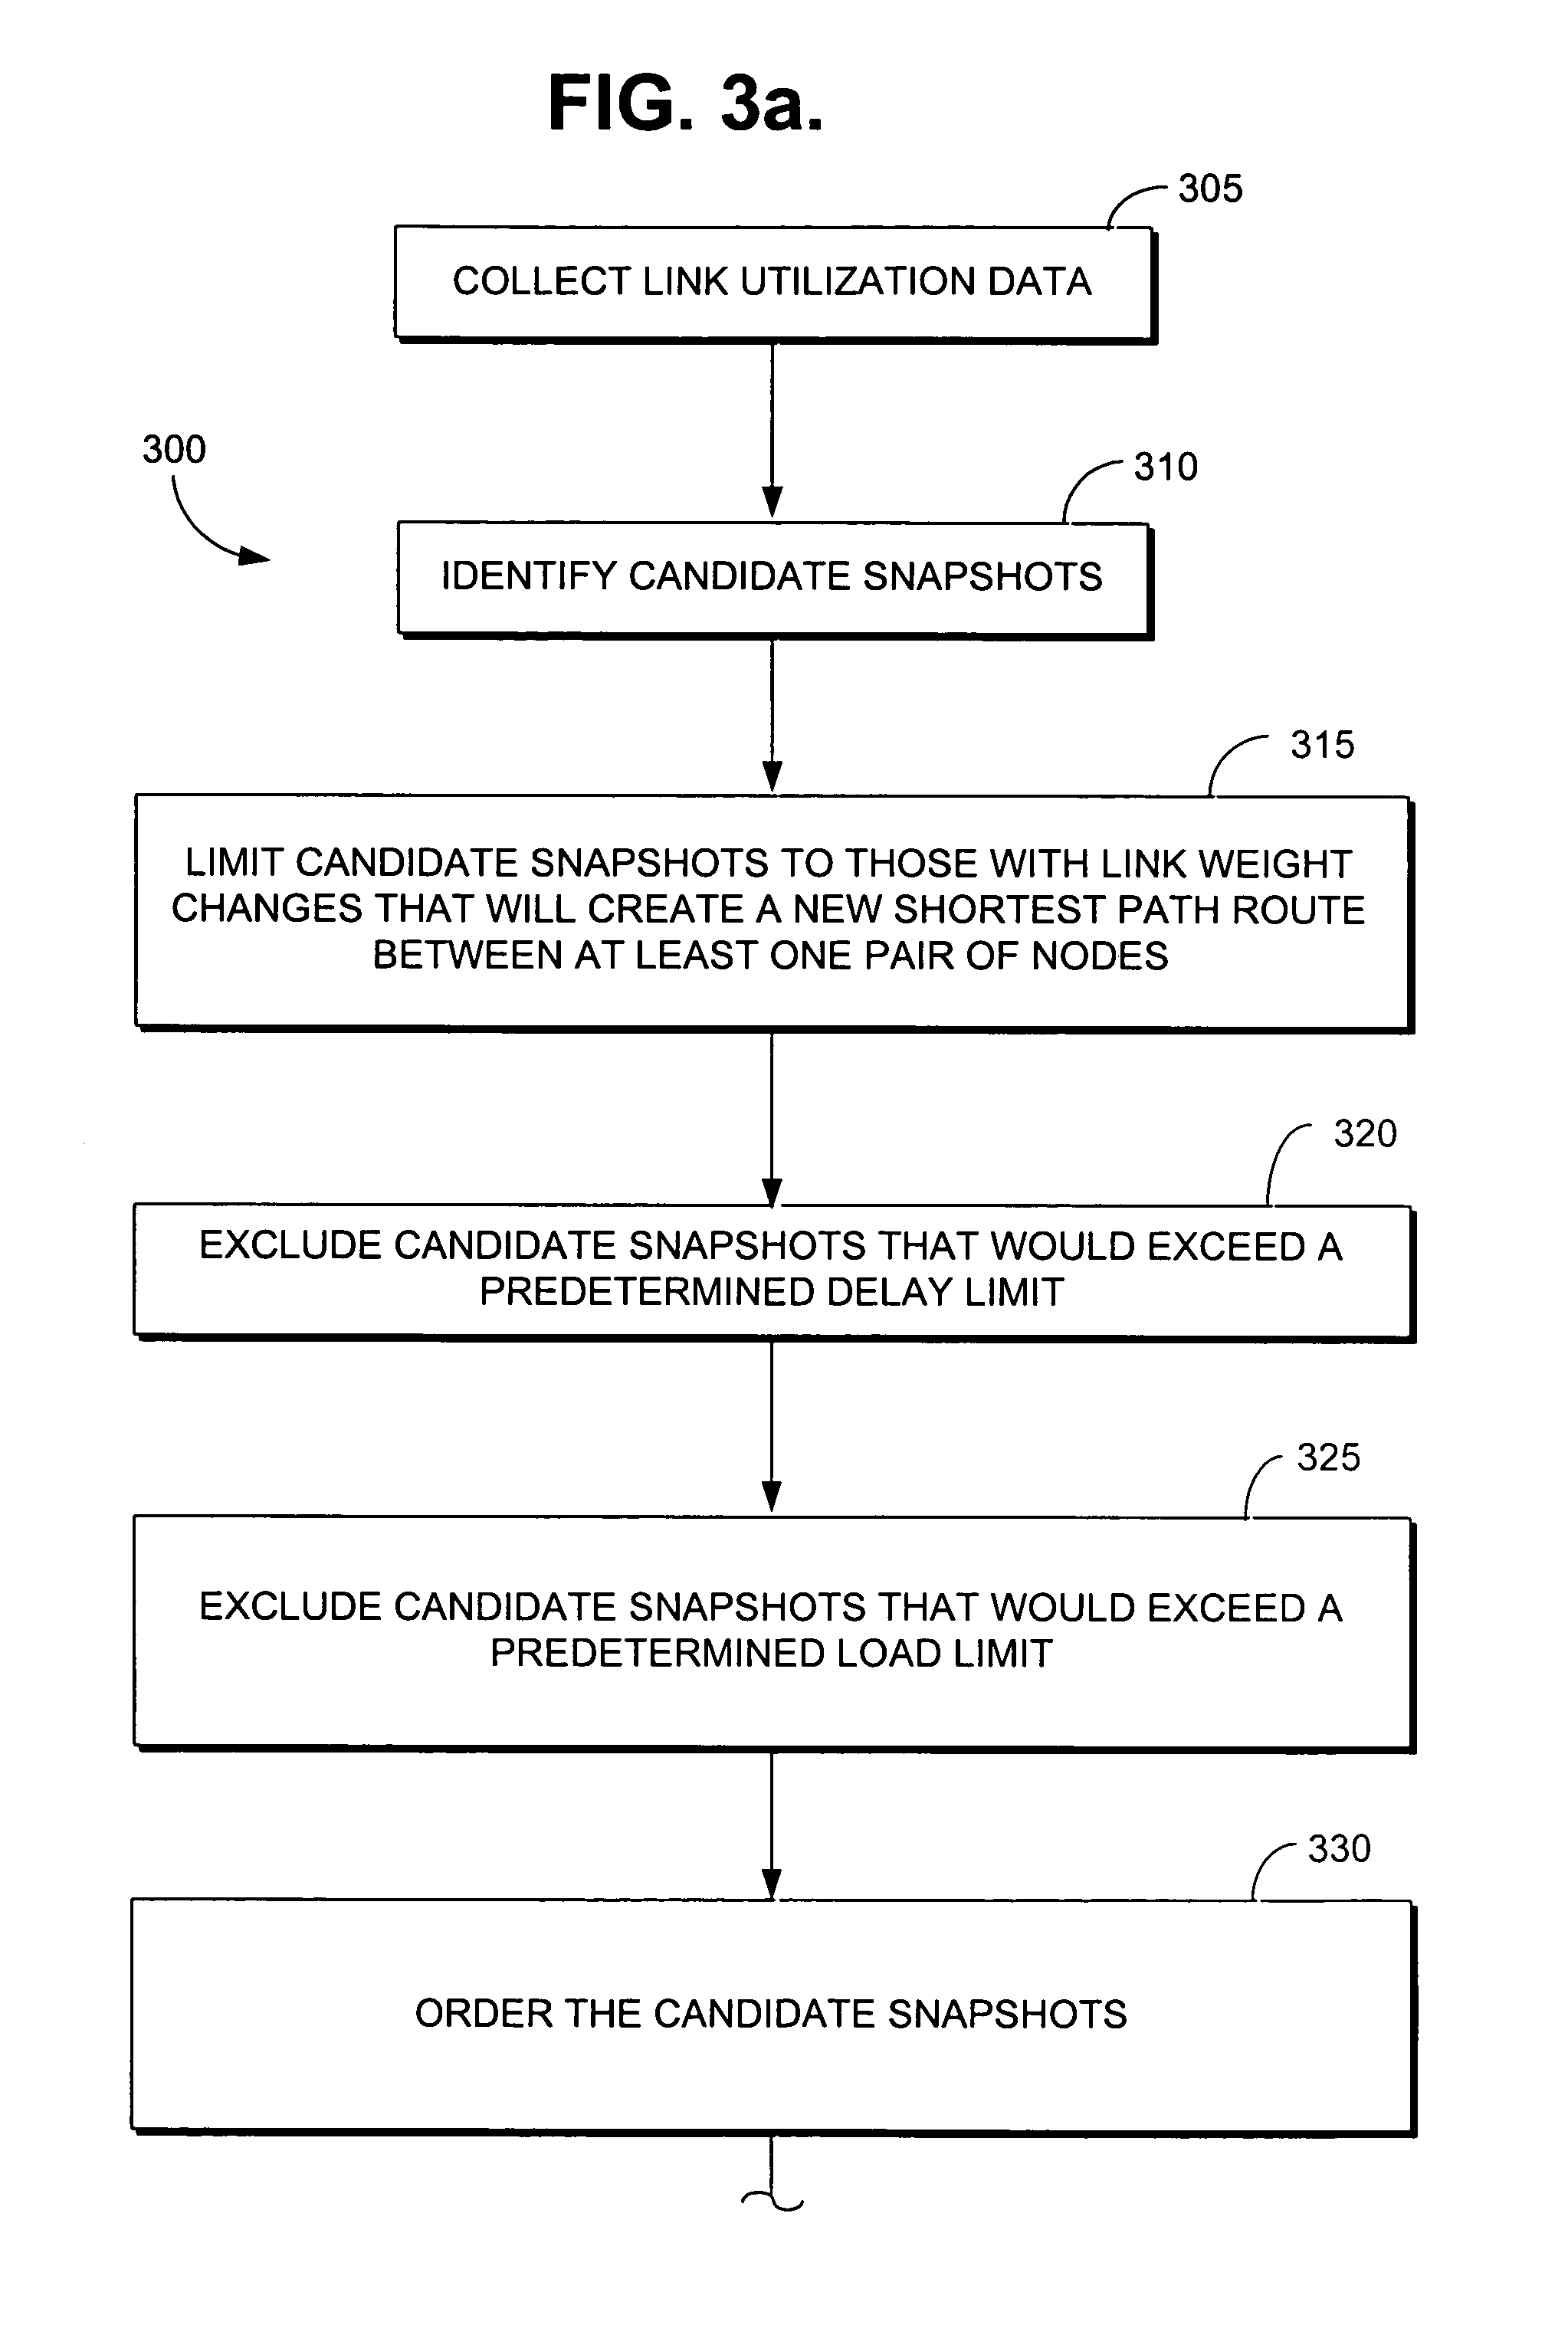 Method for altering link weights in a communication network within network parameters to provide traffic information for improved forecasting